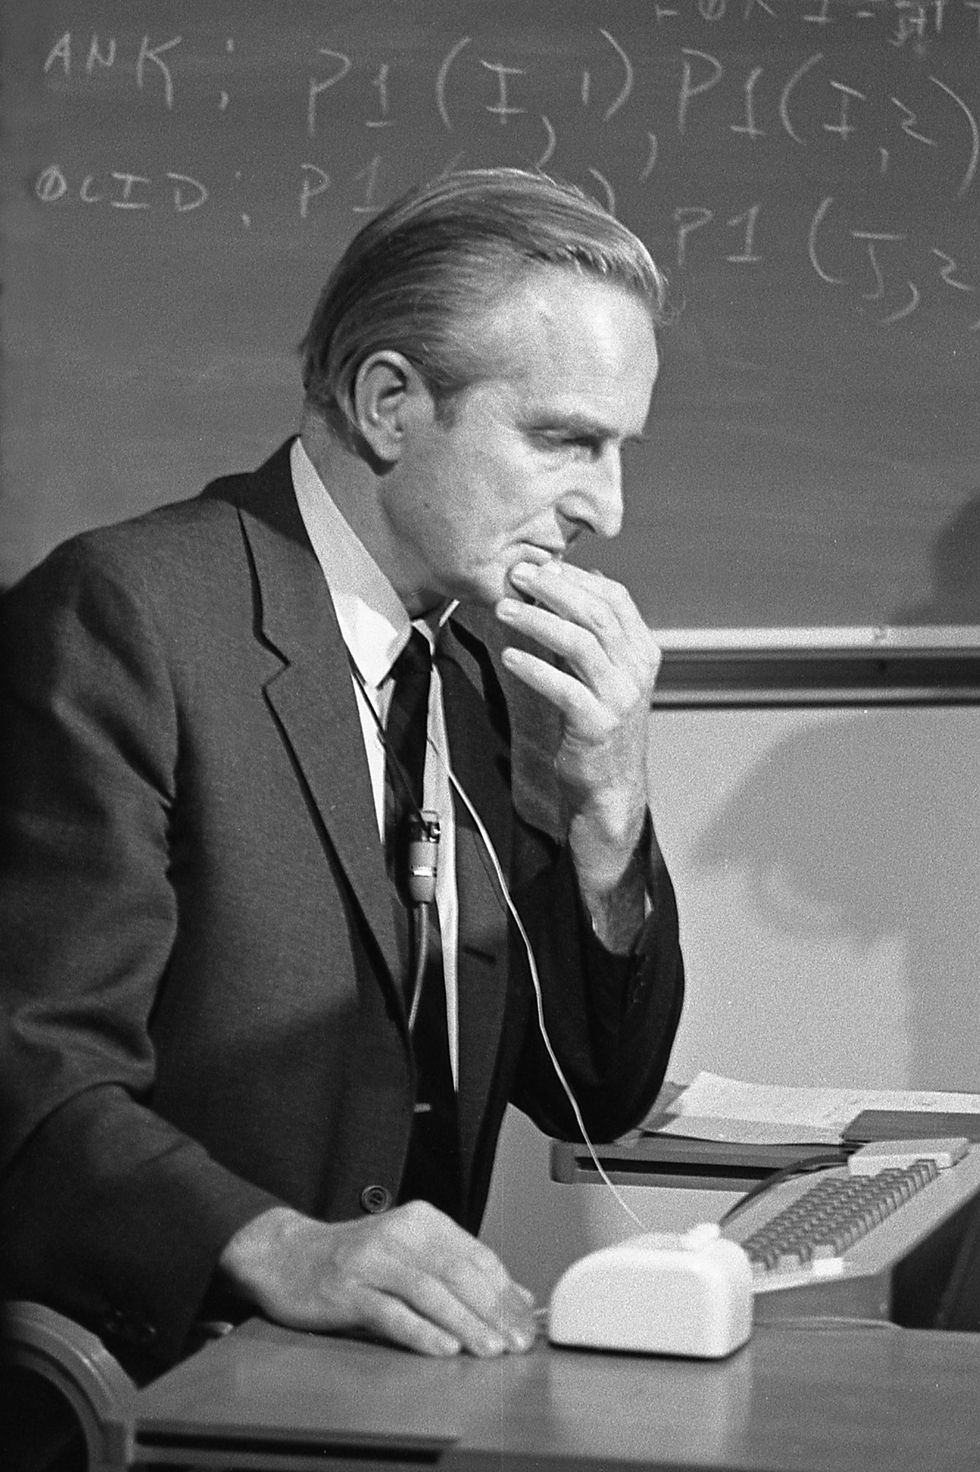 douglas c engelbart, american engineer, inventor of the computer mouse in 1963, here at presentation of prototype on december 9, 1968